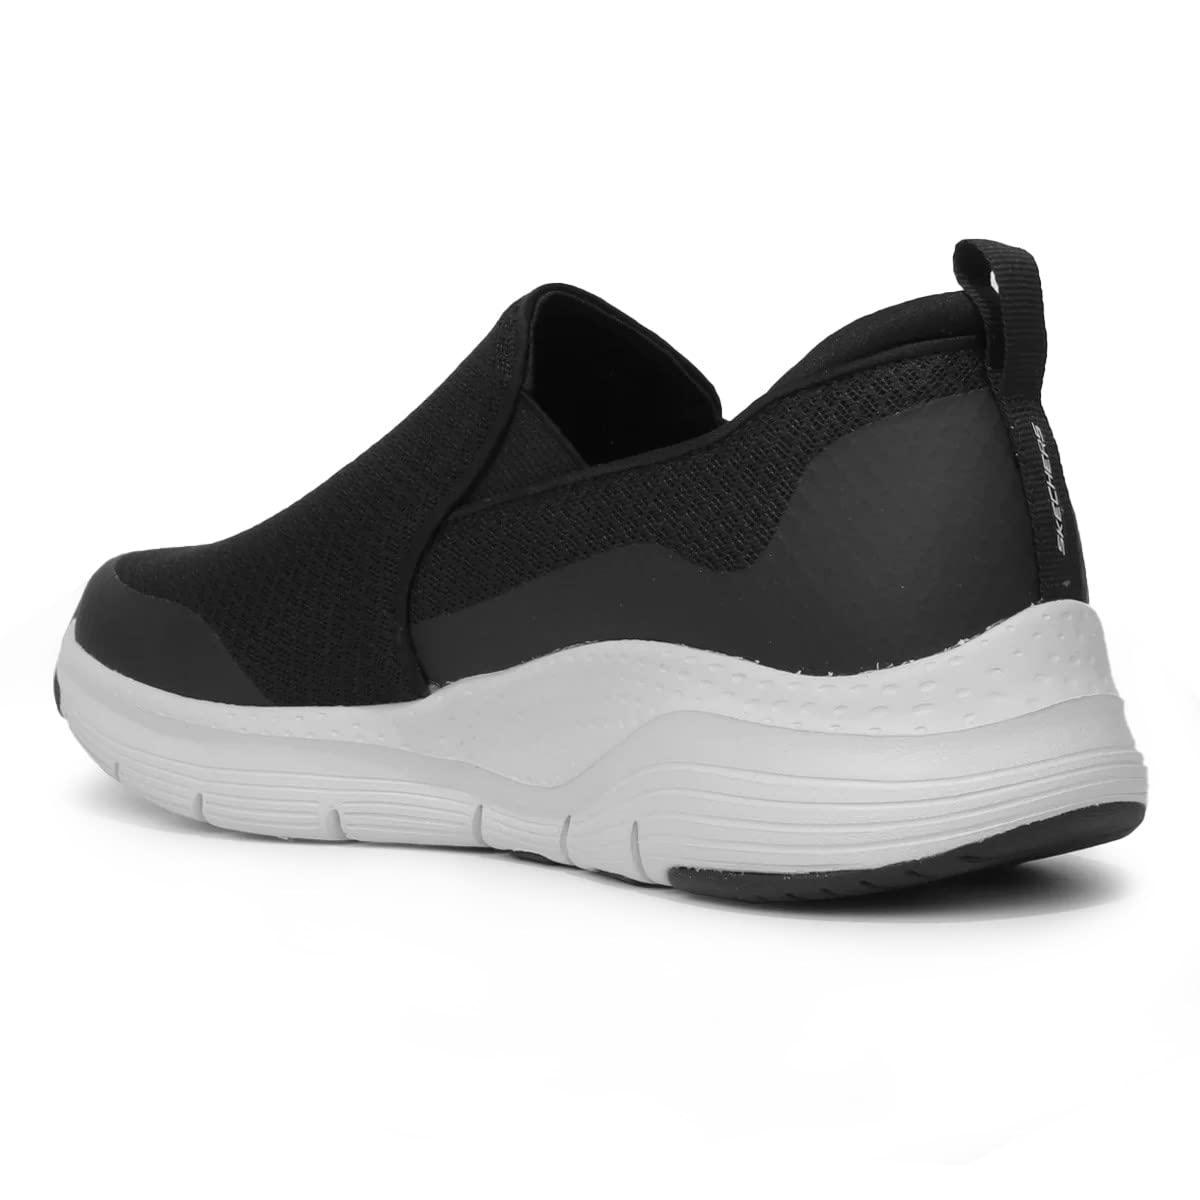 Skechers Arch Fit Banlin Trainers,black Mesh/white Synthetic/trim,10 Uk ...